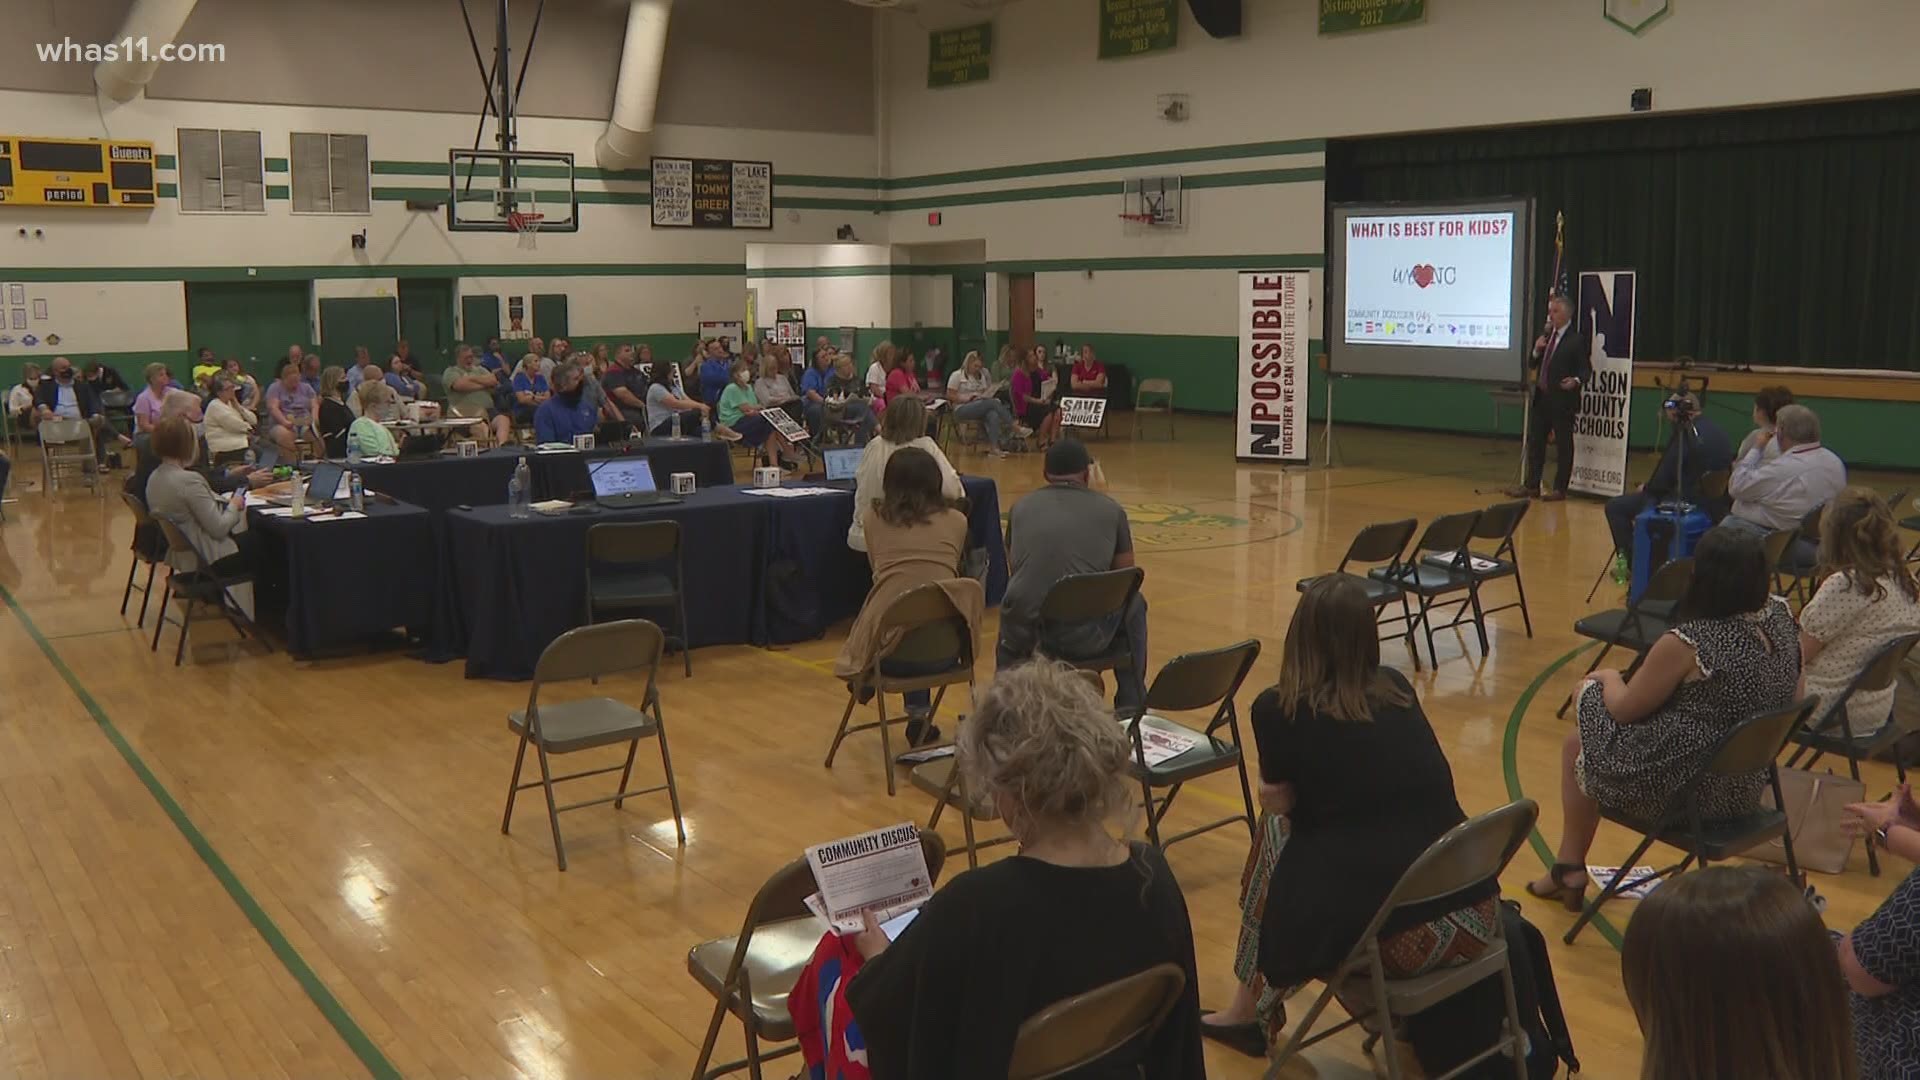 After the district proposed a measure to merge several schools, parents are calling on the Nelson County School Board to oust the superintendent.